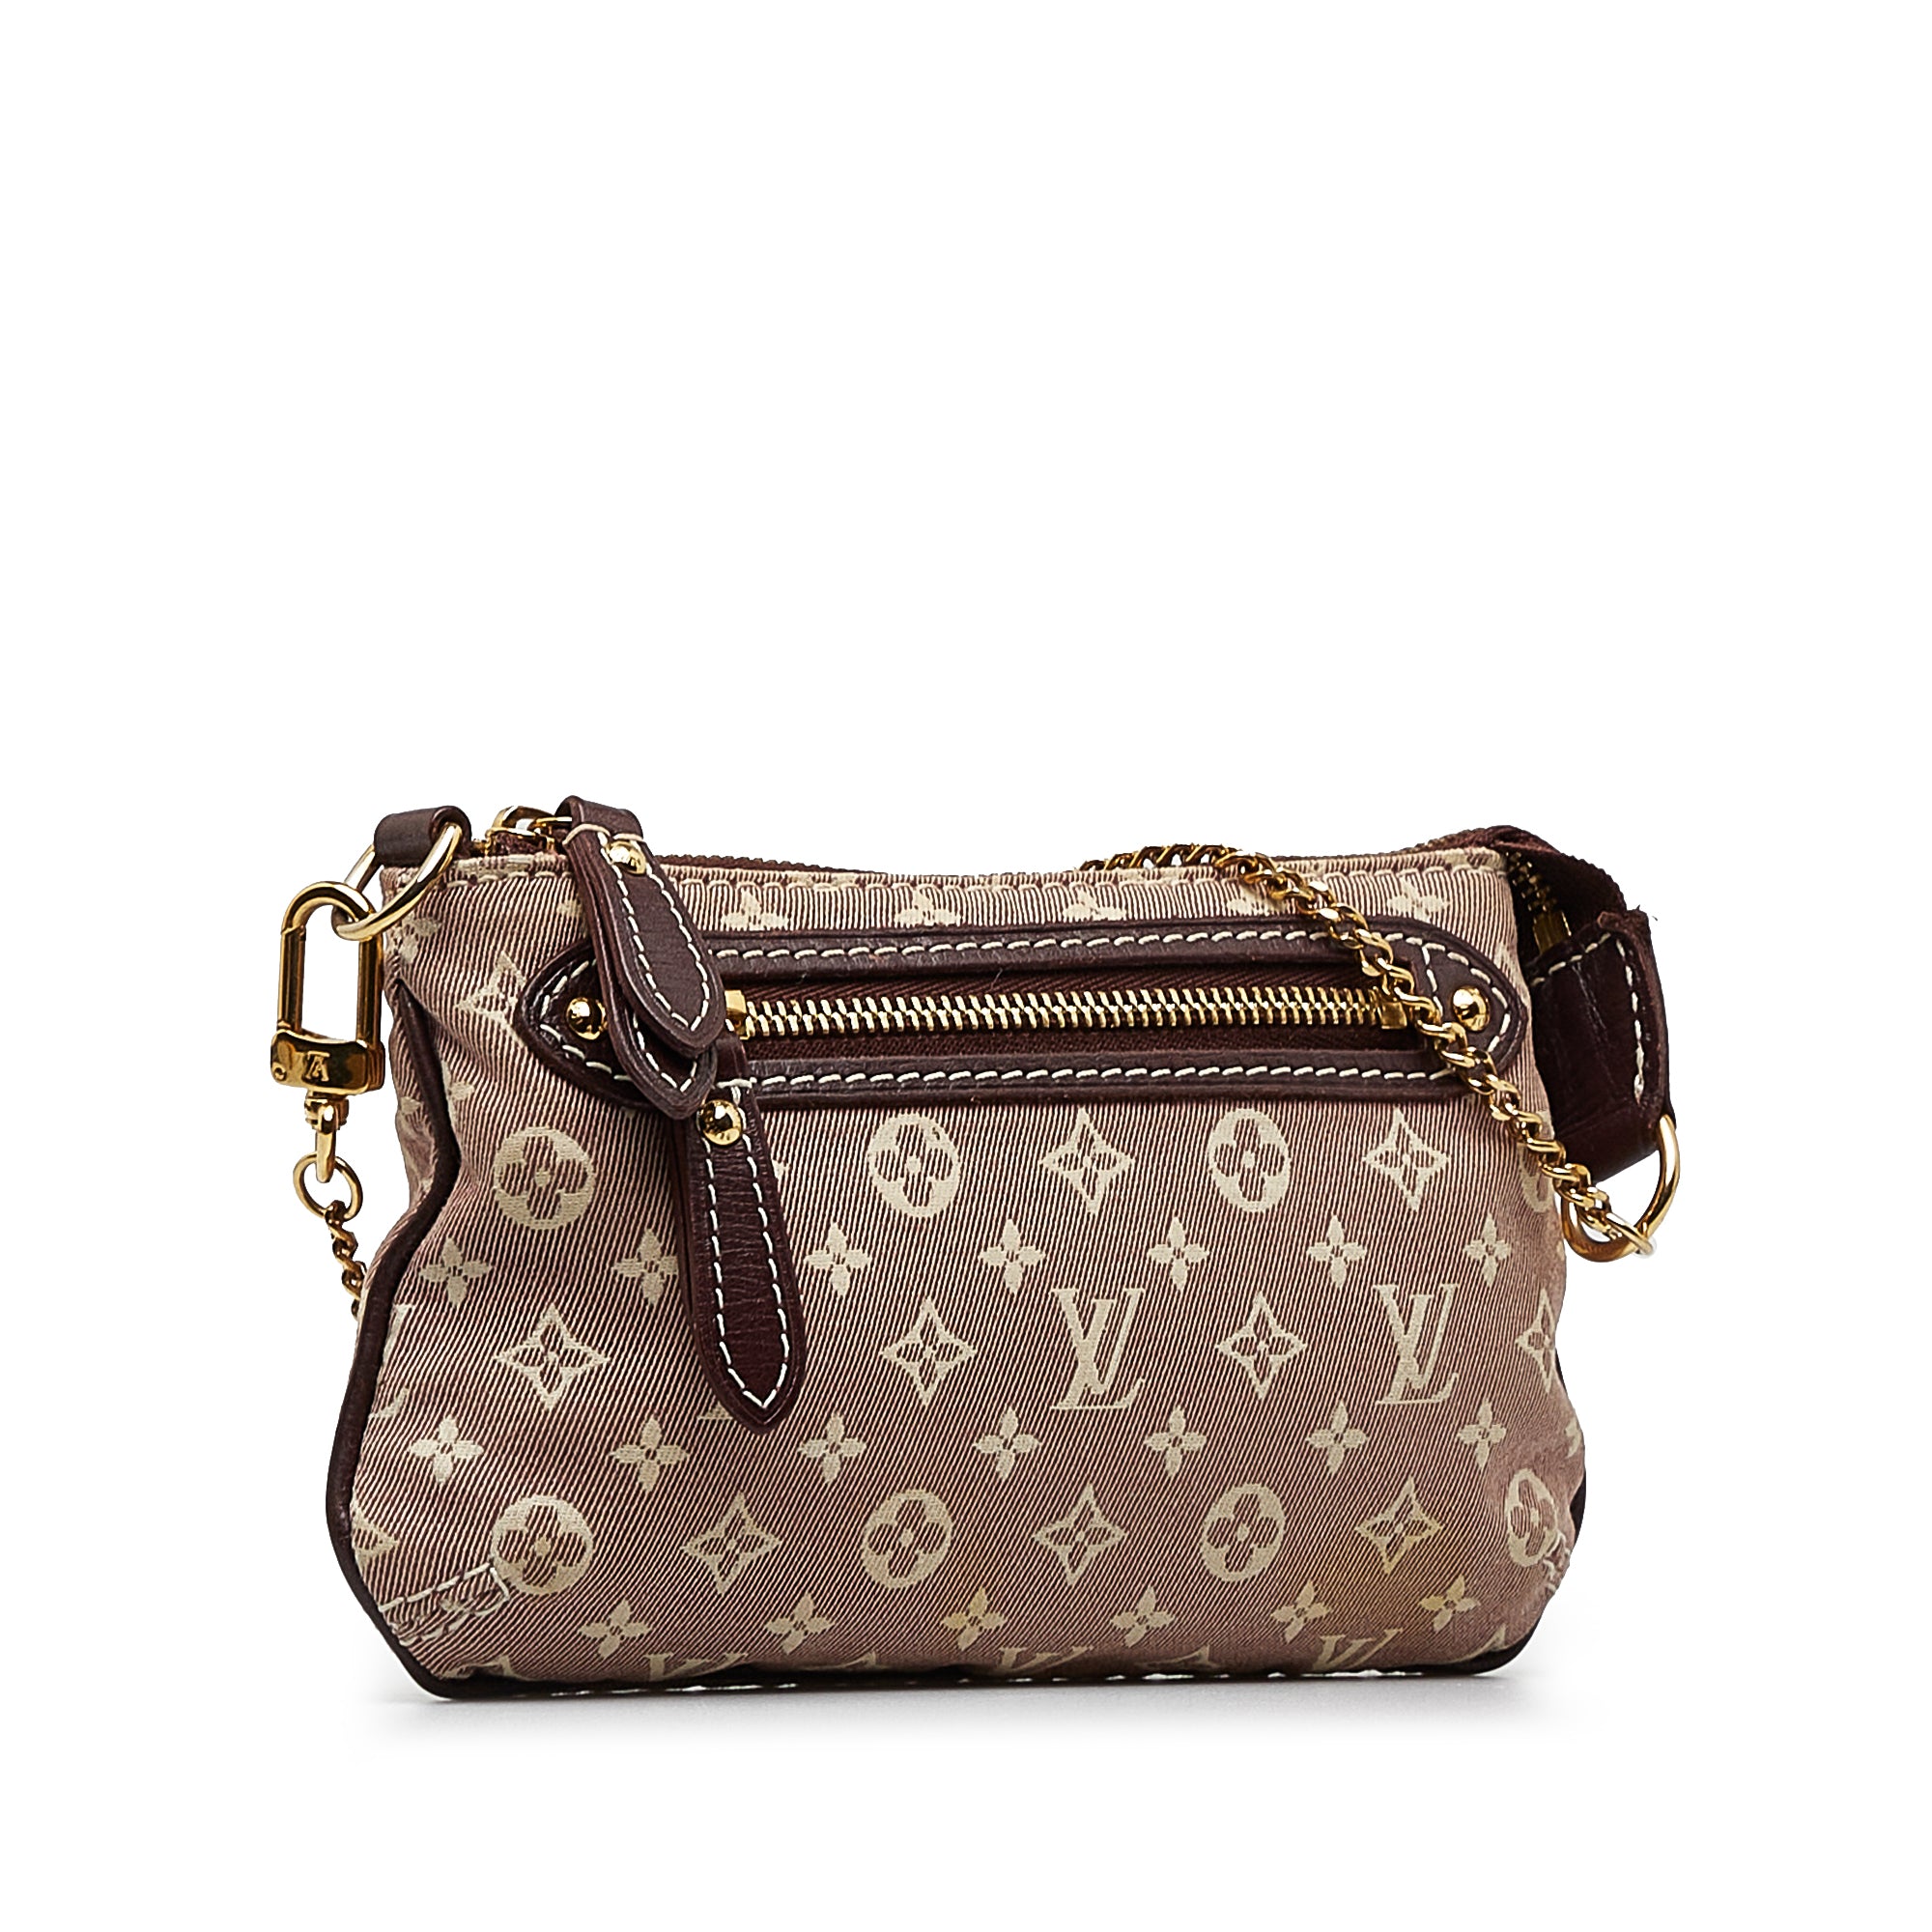 SOLD OUT - Excellent Condition Brown Minilin Monogram Idylle